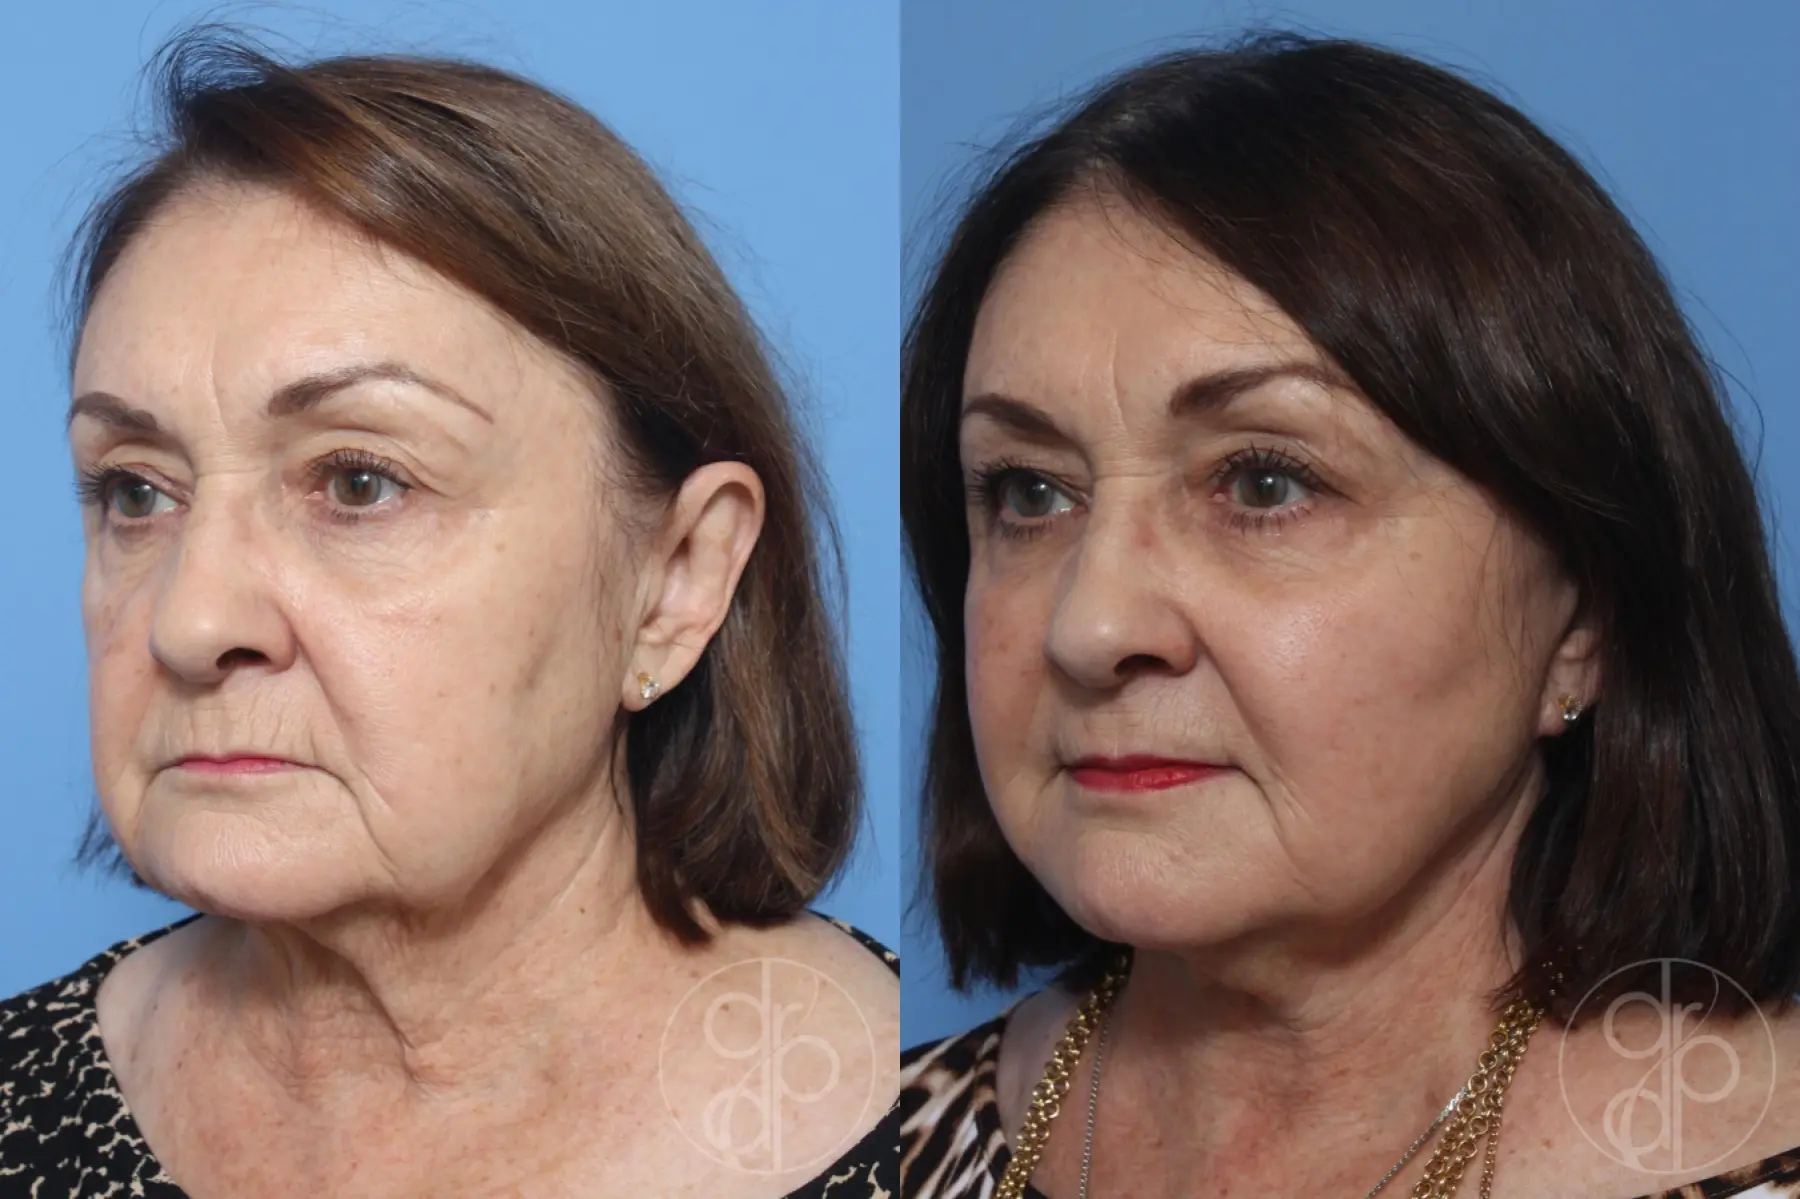 patient 12406 facelift before and after result - Before and After 2